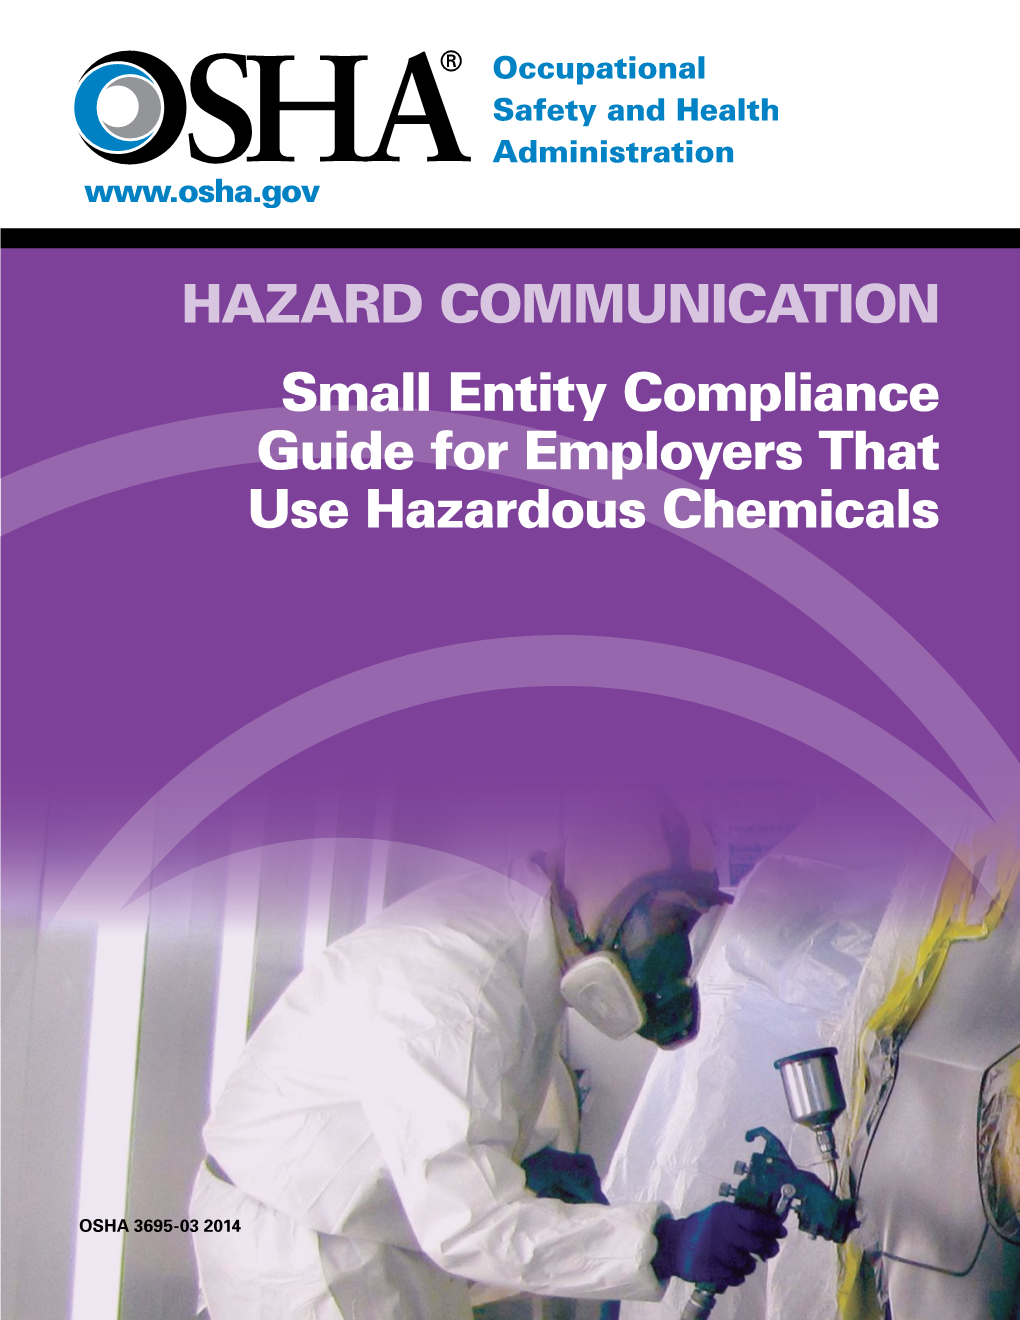 HAZARD COMMUNICATION Small Entity Compliance Guide for Employers That Use Hazardous Chemicals